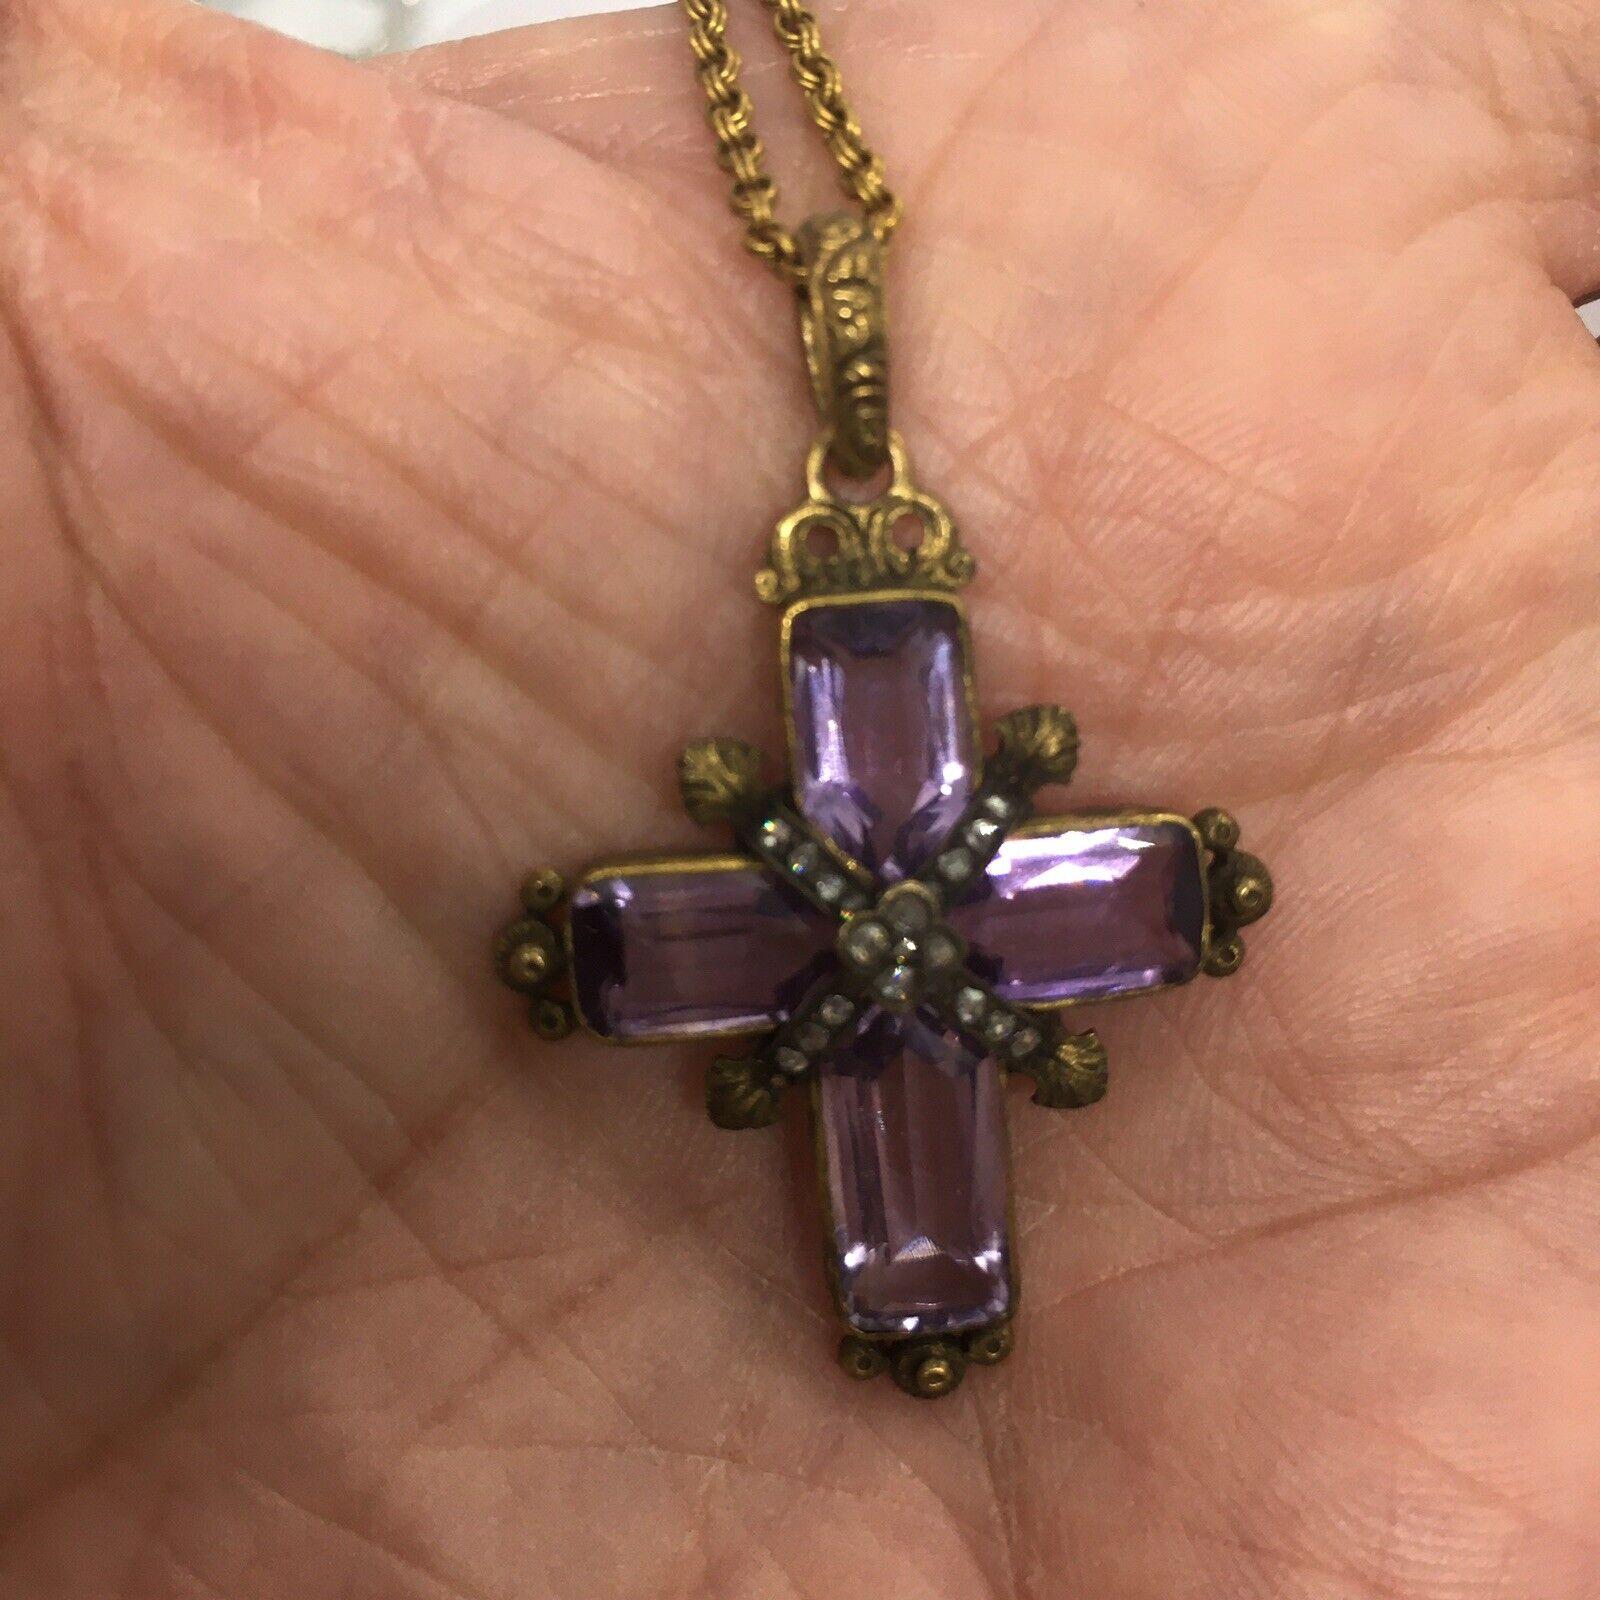 14k Gold American Georgian era Natural Amethyst Diamond Cross Antique Chain


Weighting 9.0 gram
Cross measures from top of the loop to bottom 1.5 inch, it is 1 inch wide
19 pieces of old mine cut Diamonds 1/4 Carat total weight bead set on